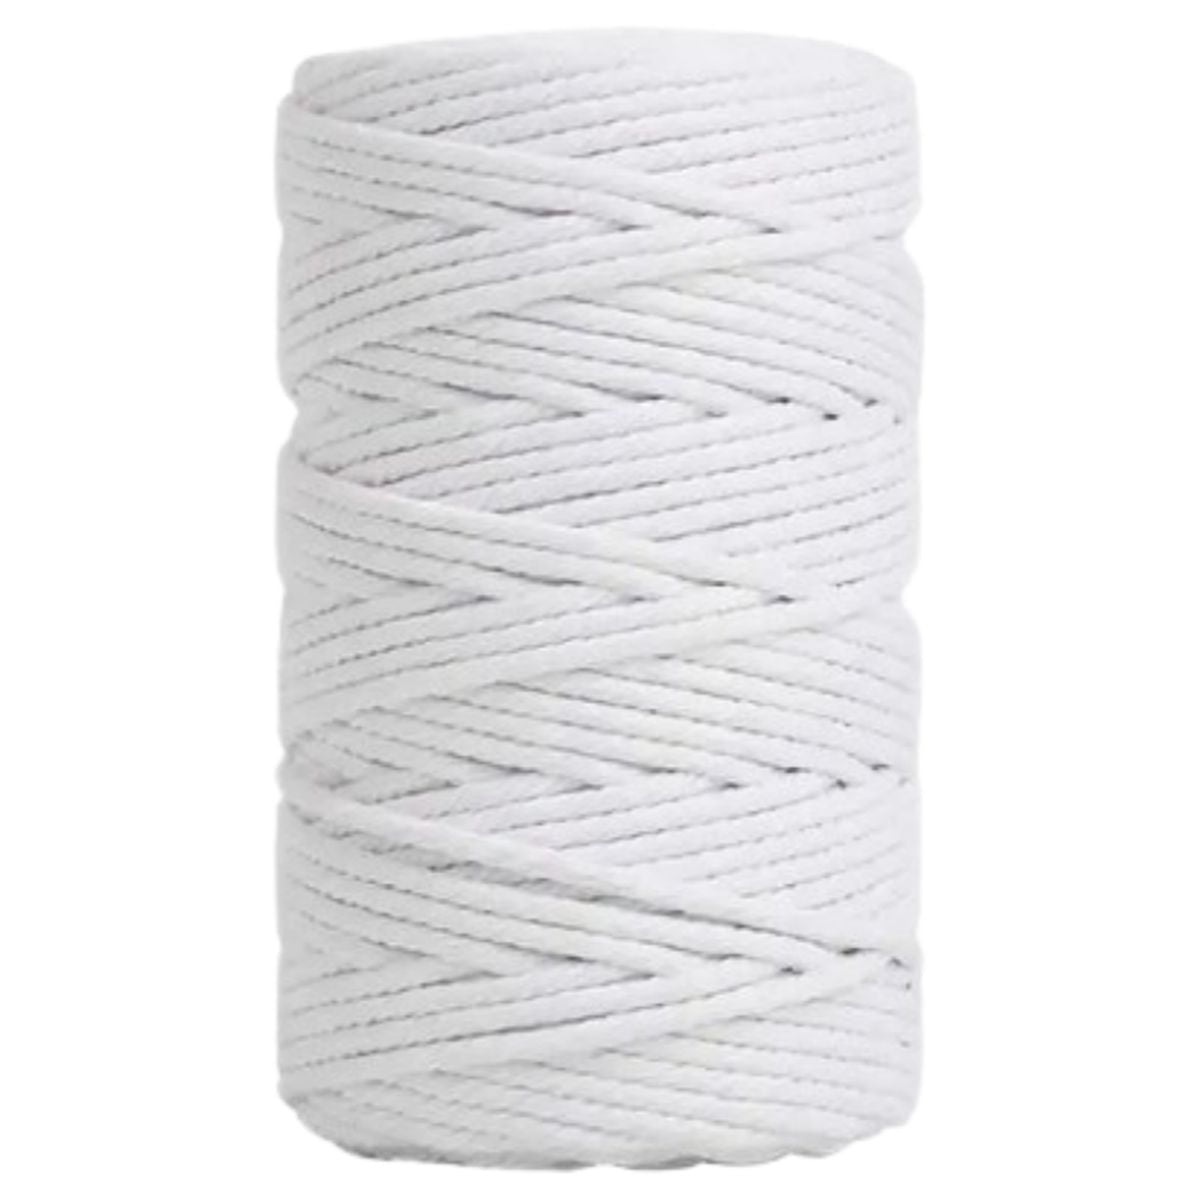 2 Rolls Black Cotton Butchers Twine for Cooking, Trianu 2mm x 656 feet  Kitchen Twine String for Crafts, Meat Cooking, Roasting, Gift Wrapping 